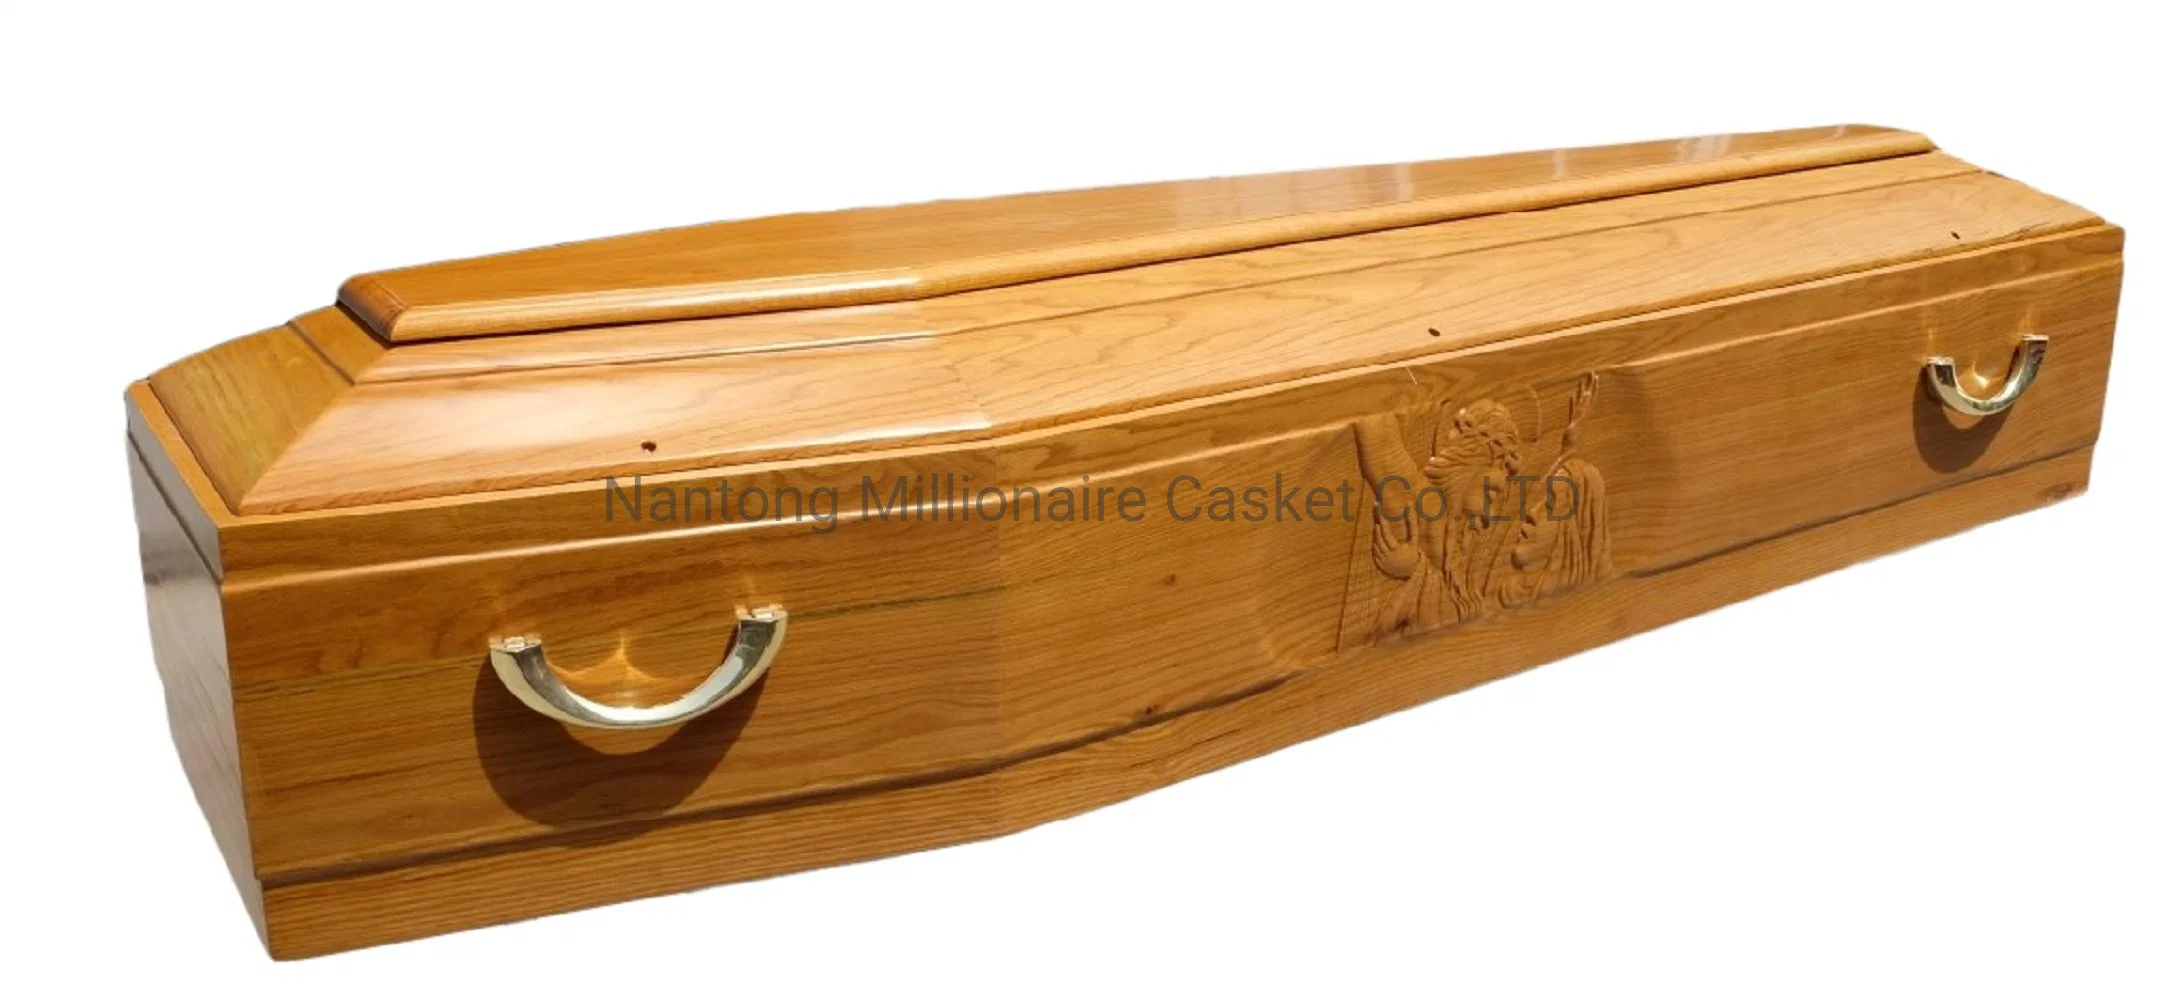 Solid Wood Casket and Coffin